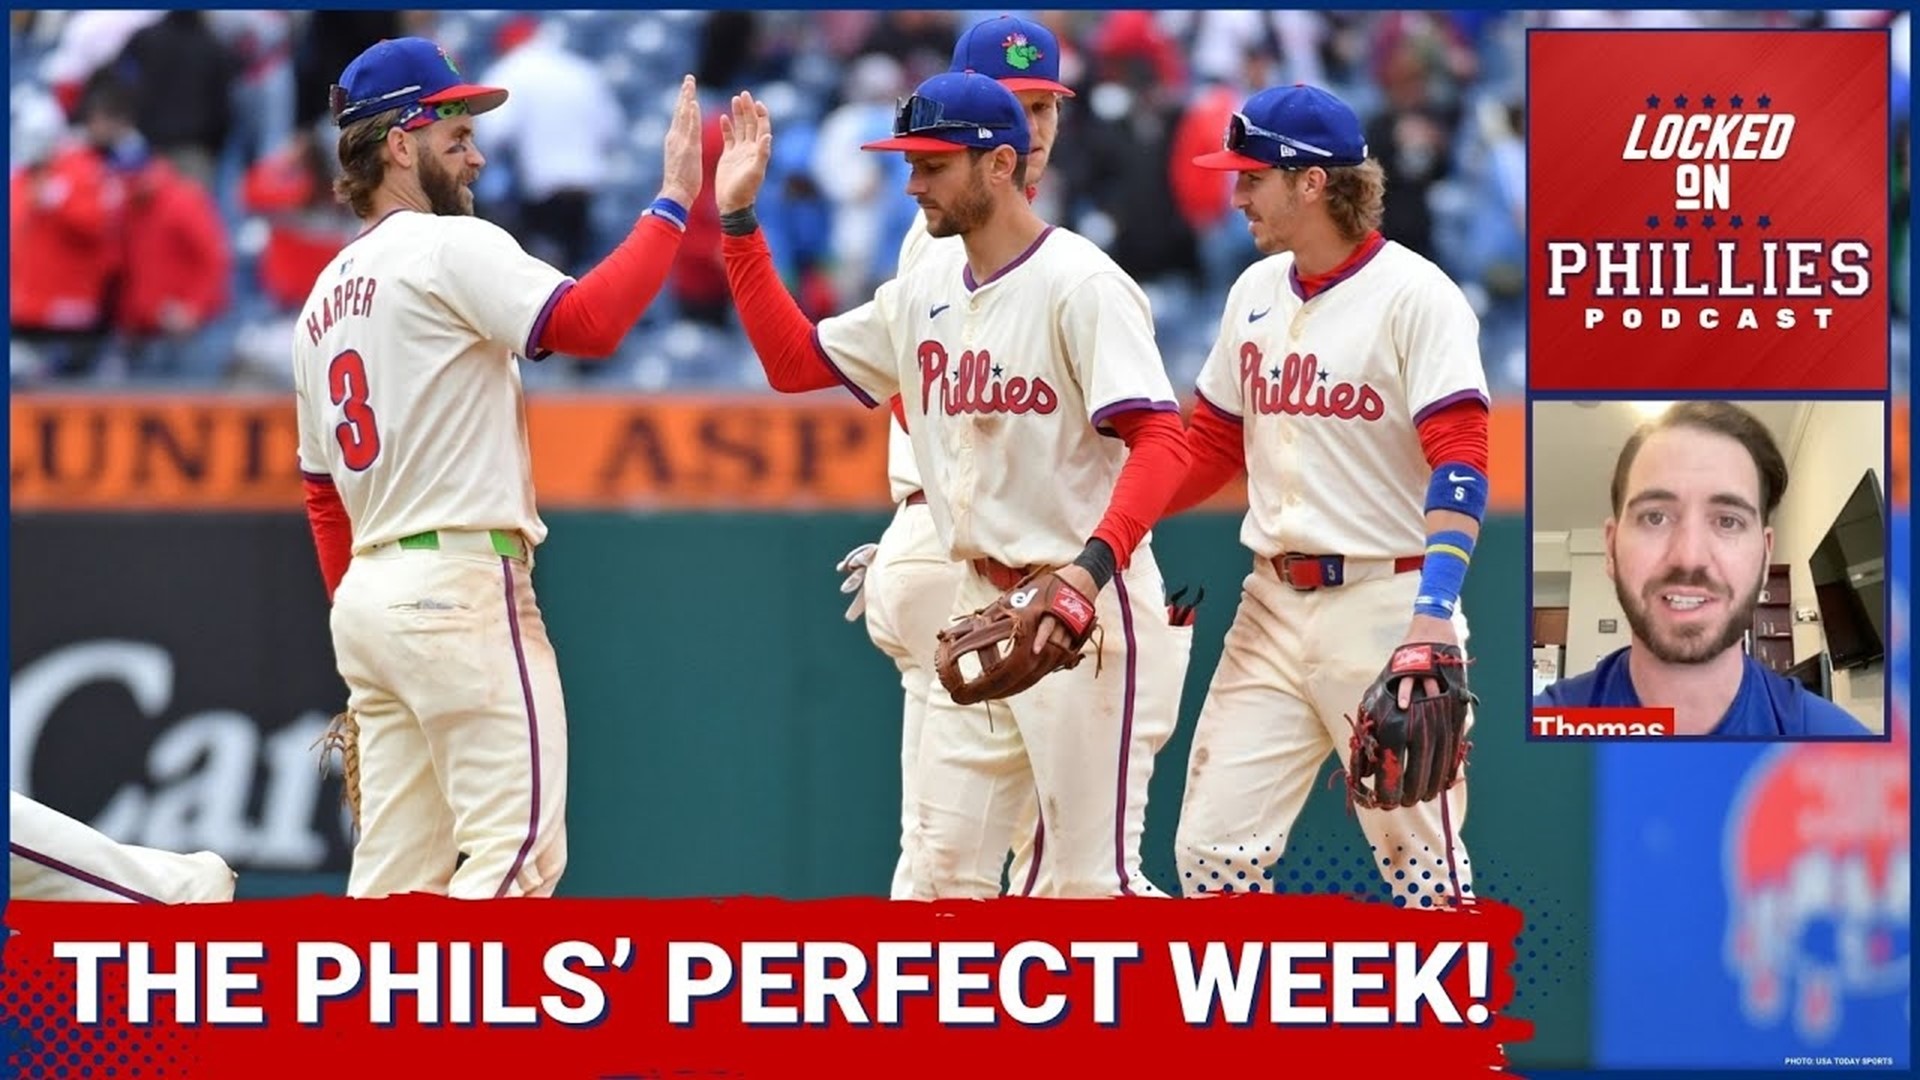 In today's episode, Connor couldn't be happier with the Philadelphia Phillies' perfect 6-0 week as they swept out the Chicago White Sox over the weekend!